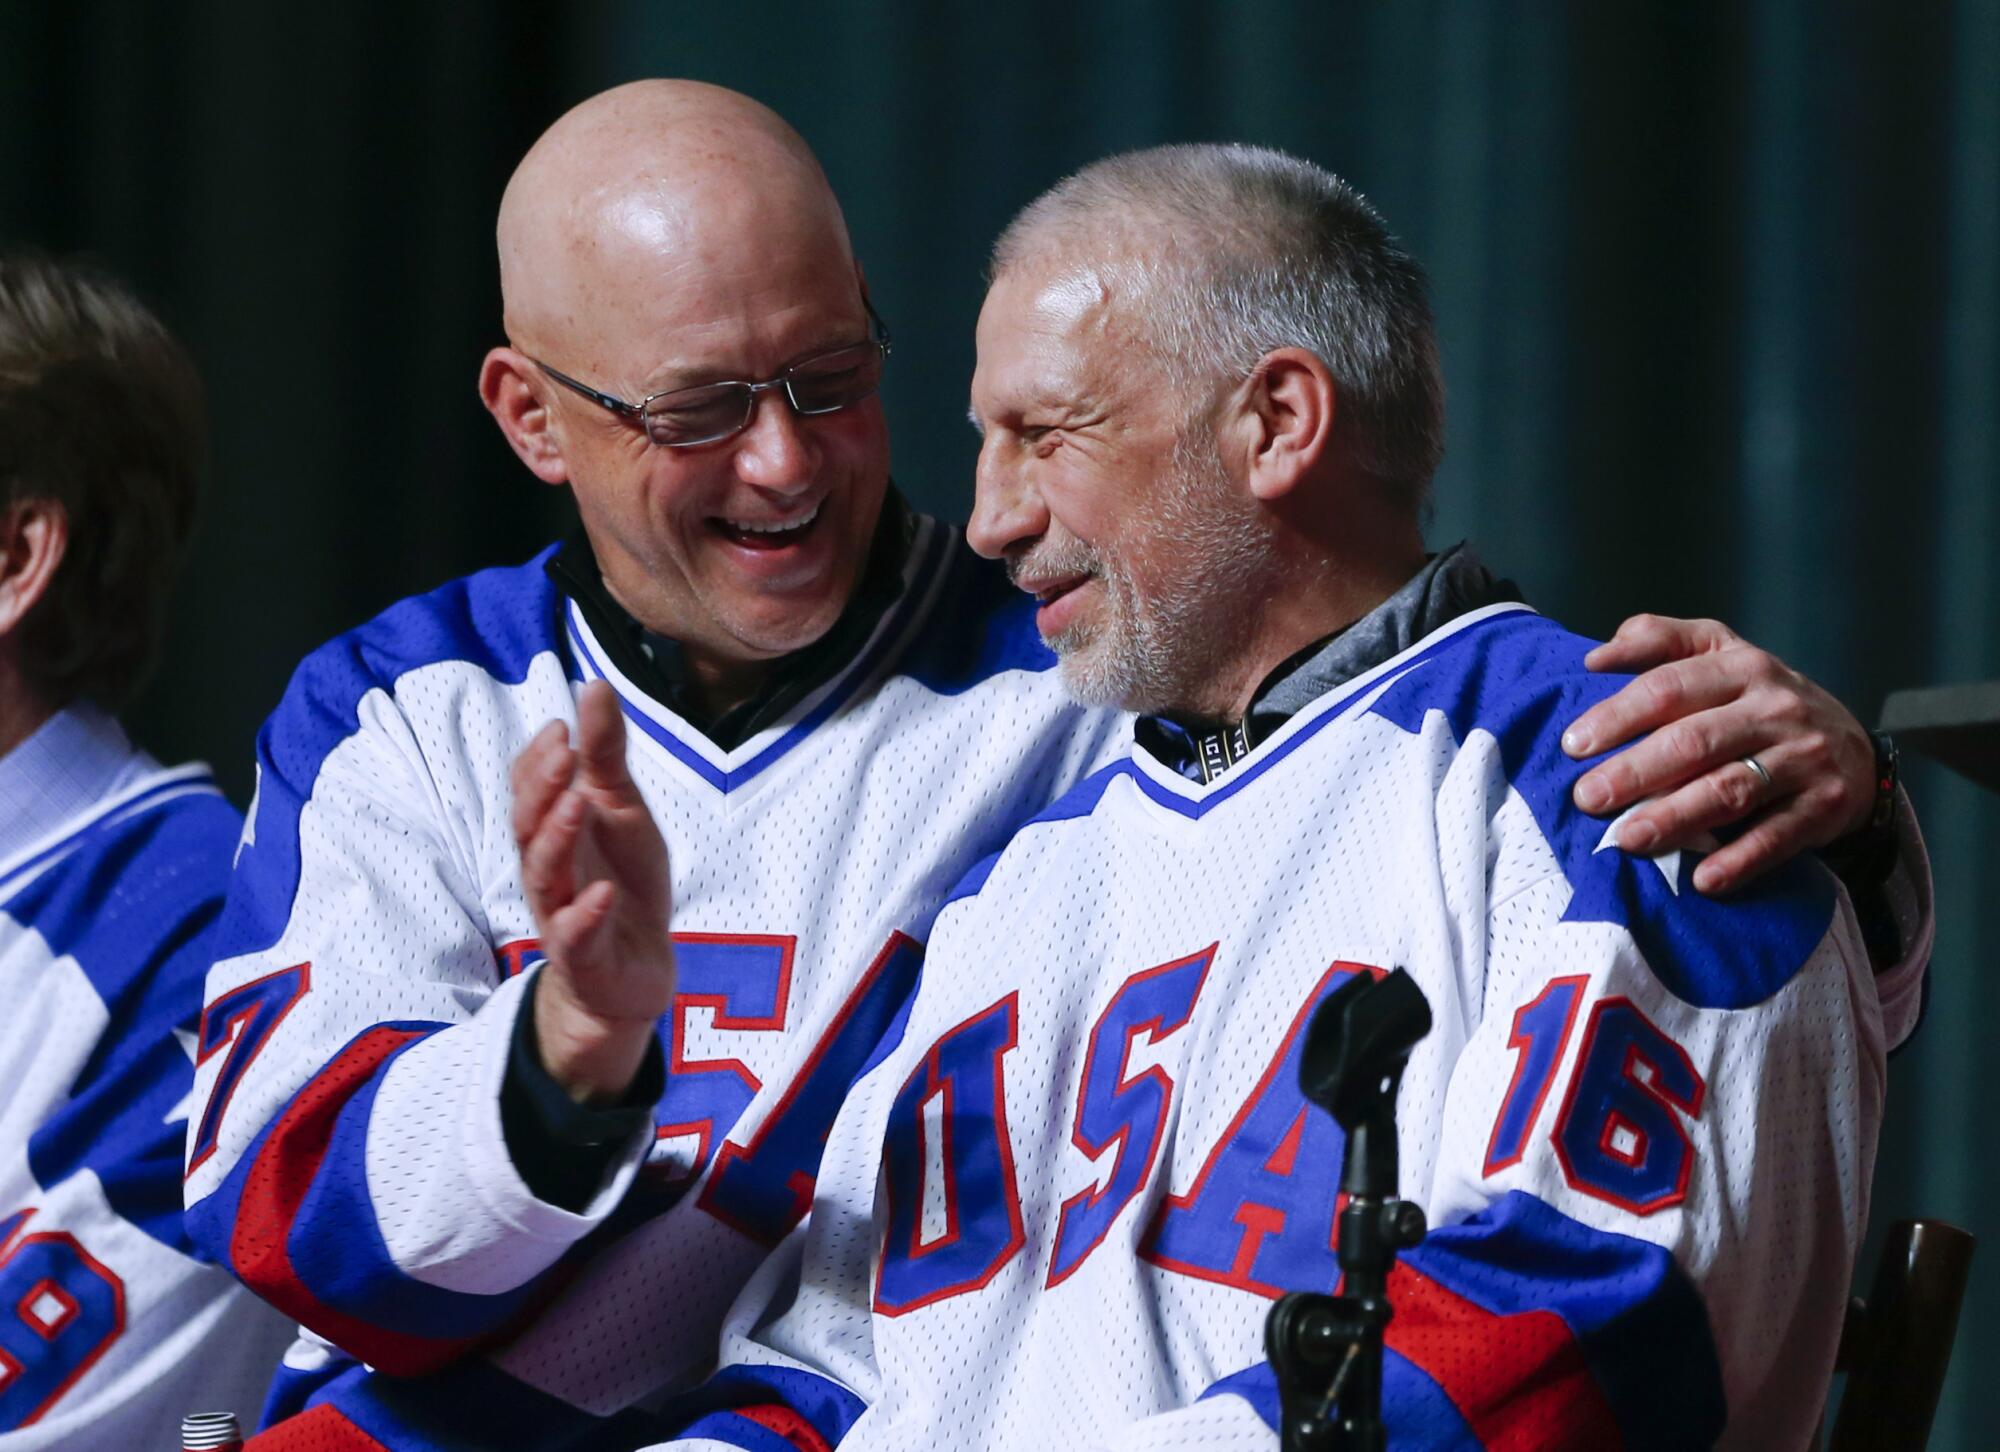 Mark Pavelich, right, a member of the 1980 "Miracle on Ice" U.S. Olympic hockey team, shares a laugh with a teammate.